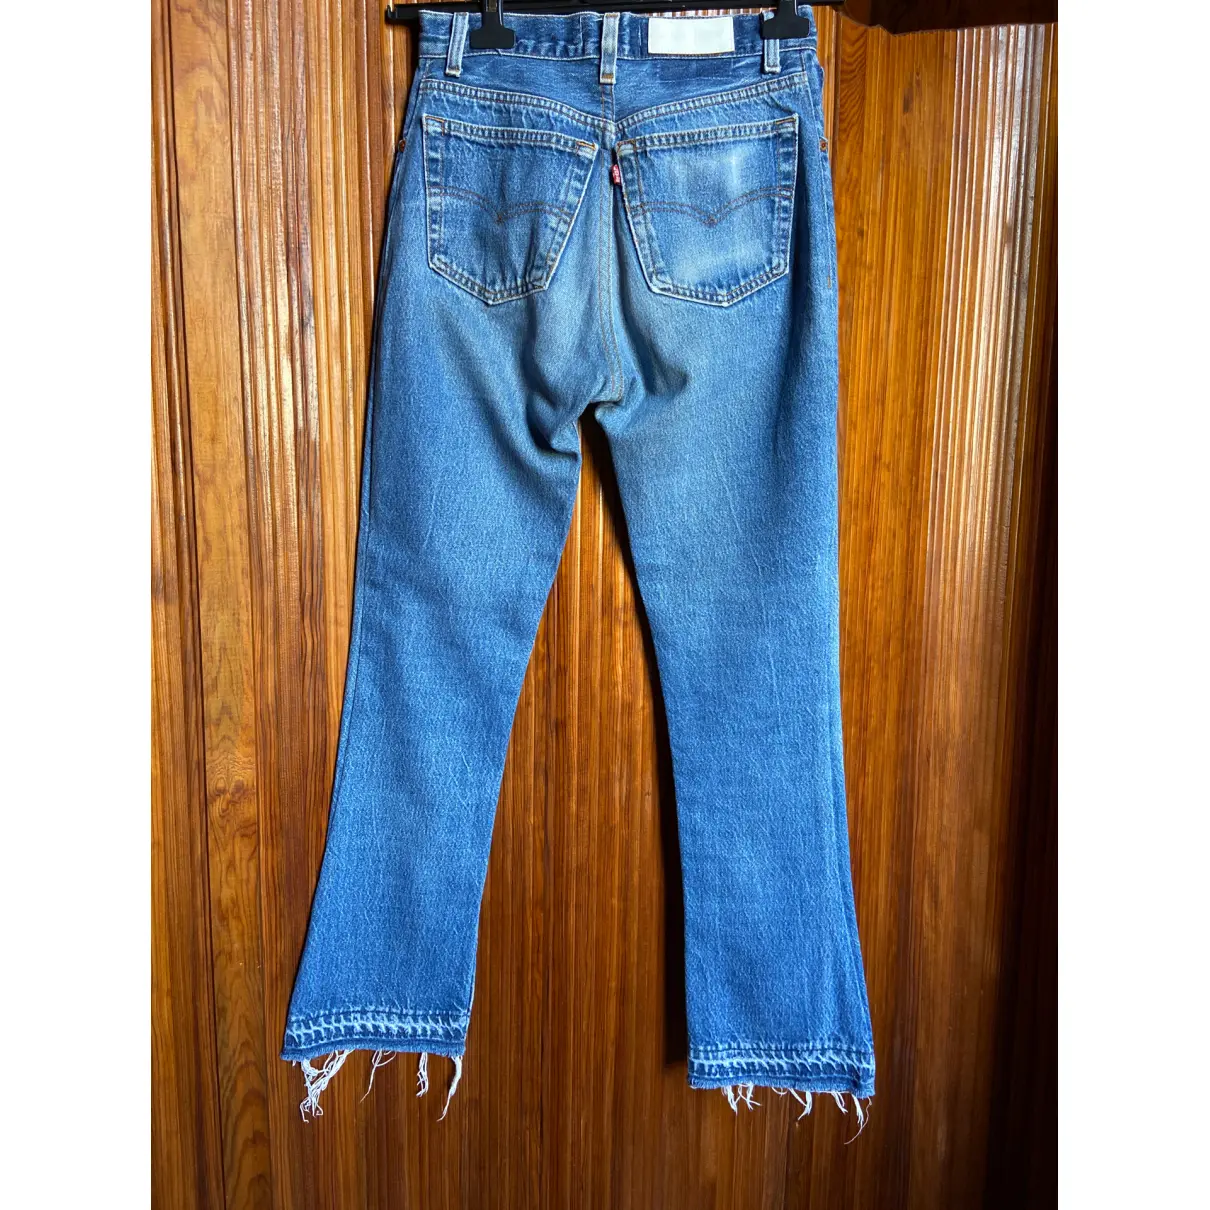 Buy Re/Done x Levi's Bootcut jeans online